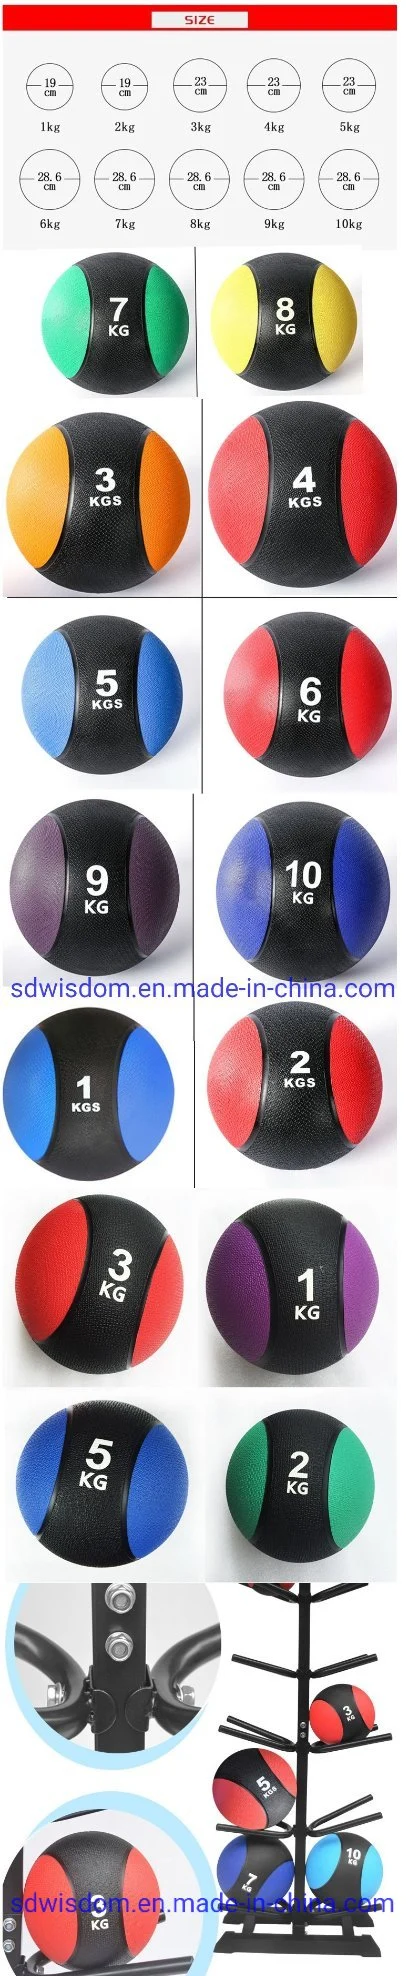 Non-Slip Rubber Weighted Fitness Medicine Ball Exercise Toning Ball Heavy Workout Ball for Gym Fitness